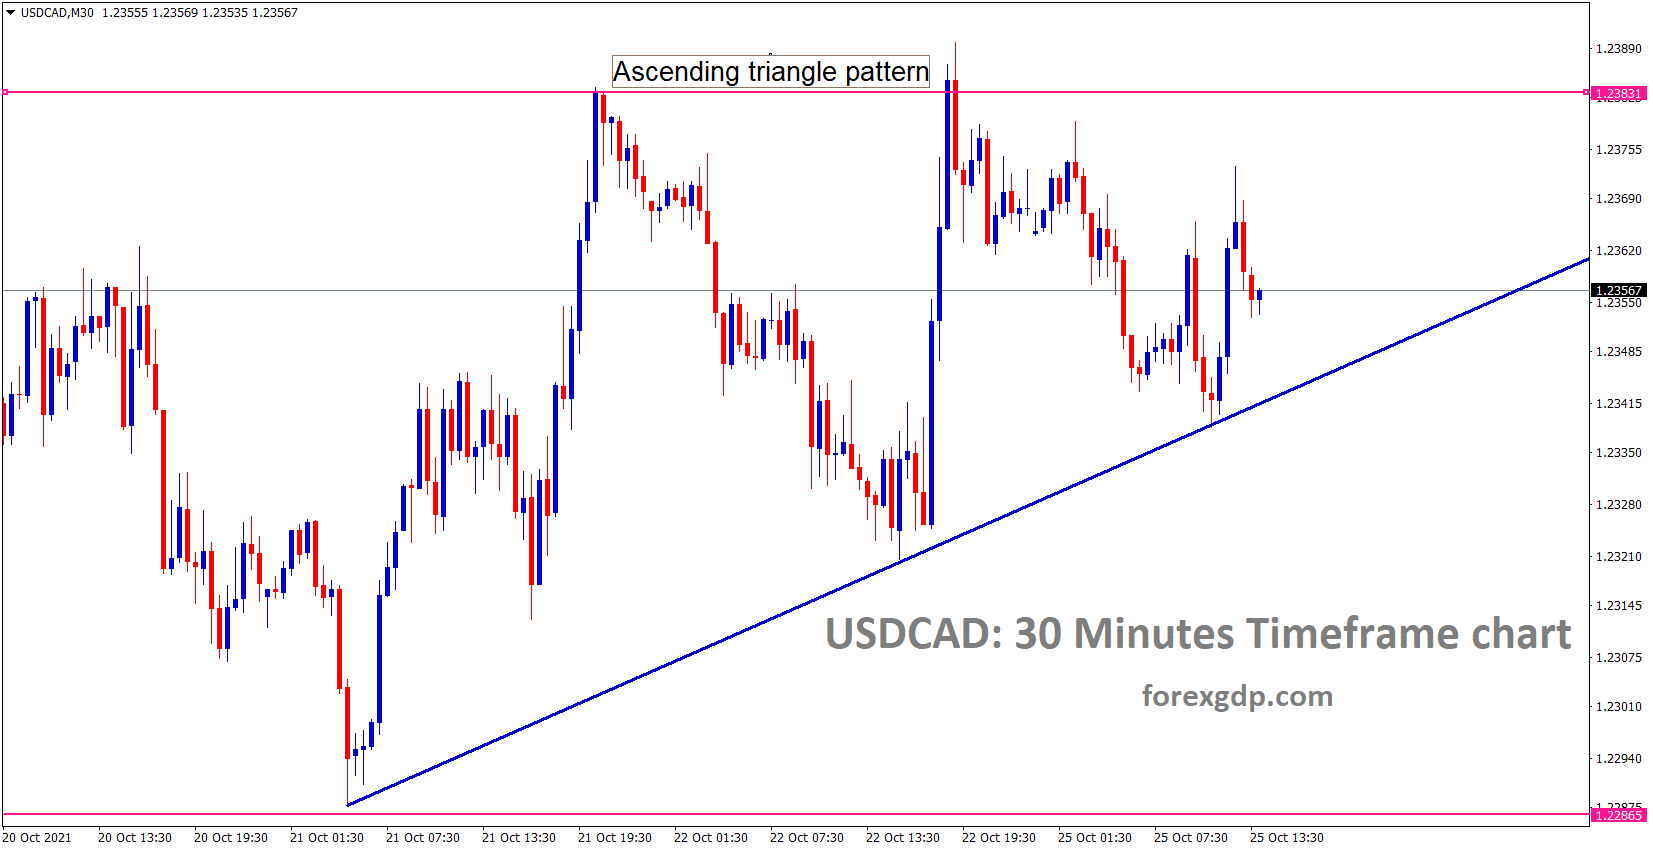 USDCAD is moving in an ascending triangle pattern and highe high progress